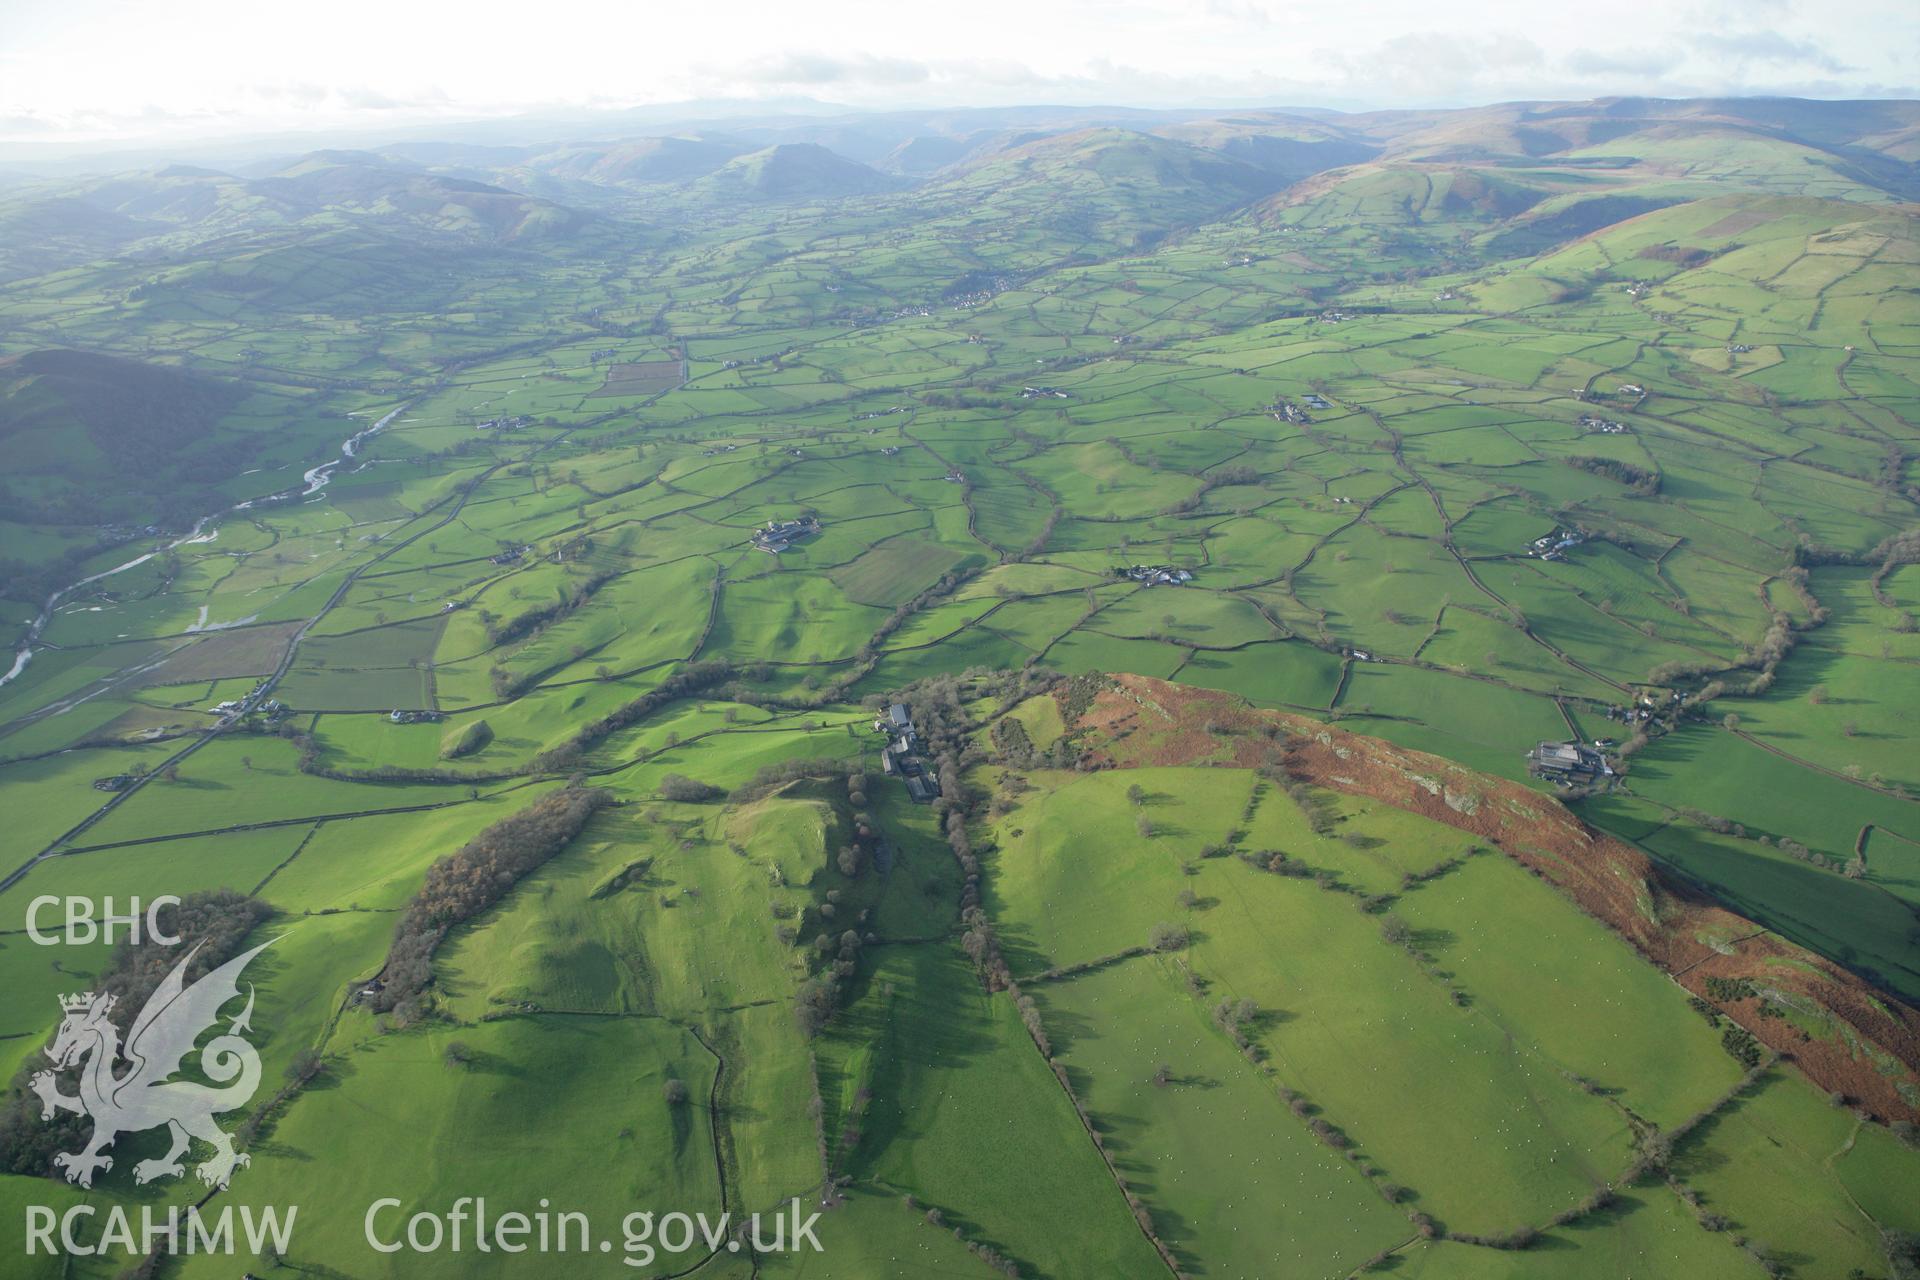 RCAHMW colour oblique aerial photograph of Soar Welsh Baptist Chapel, Efail-Rhyd in landscape view to the west of Craig Orllwyn, Tanat Valley. Taken on 10 December 2009 by Toby Driver